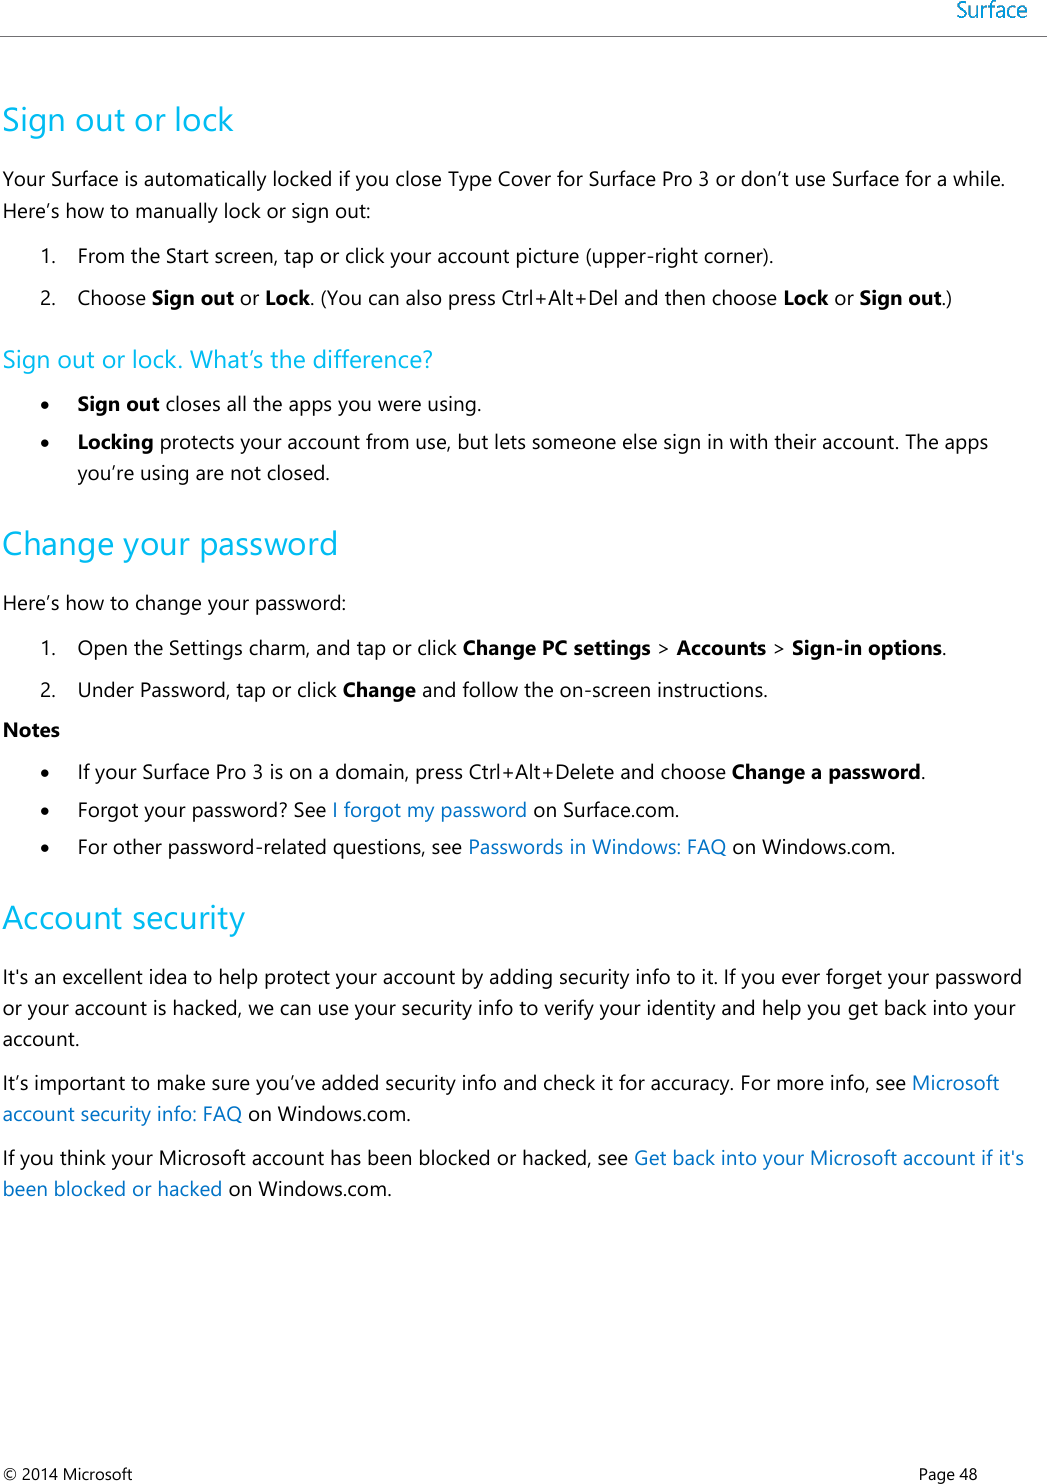  © 2014 Microsoft      Page 48  Sign out or lock Your Surface is automatically locked if you close Type Cover for Surface Pro 3 or don’t use Surface for a while. Here’s how to manually lock or sign out: 1. From the Start screen, tap or click your account picture (upper-right corner).  2. Choose Sign out or Lock. (You can also press Ctrl+Alt+Del and then choose Lock or Sign out.) Sign out or lock. What’s the difference?  Sign out closes all the apps you were using.   Locking protects your account from use, but lets someone else sign in with their account. The apps you’re using are not closed.  Change your password Here’s how to change your password: 1. Open the Settings charm, and tap or click Change PC settings &gt; Accounts &gt; Sign-in options.  2. Under Password, tap or click Change and follow the on-screen instructions. Notes  If your Surface Pro 3 is on a domain, press Ctrl+Alt+Delete and choose Change a password.   Forgot your password? See I forgot my password on Surface.com.  For other password-related questions, see Passwords in Windows: FAQ on Windows.com. Account security It&apos;s an excellent idea to help protect your account by adding security info to it. If you ever forget your password or your account is hacked, we can use your security info to verify your identity and help you get back into your account. It’s important to make sure you’ve added security info and check it for accuracy. For more info, see Microsoft account security info: FAQ on Windows.com. If you think your Microsoft account has been blocked or hacked, see Get back into your Microsoft account if it&apos;s been blocked or hacked on Windows.com.    